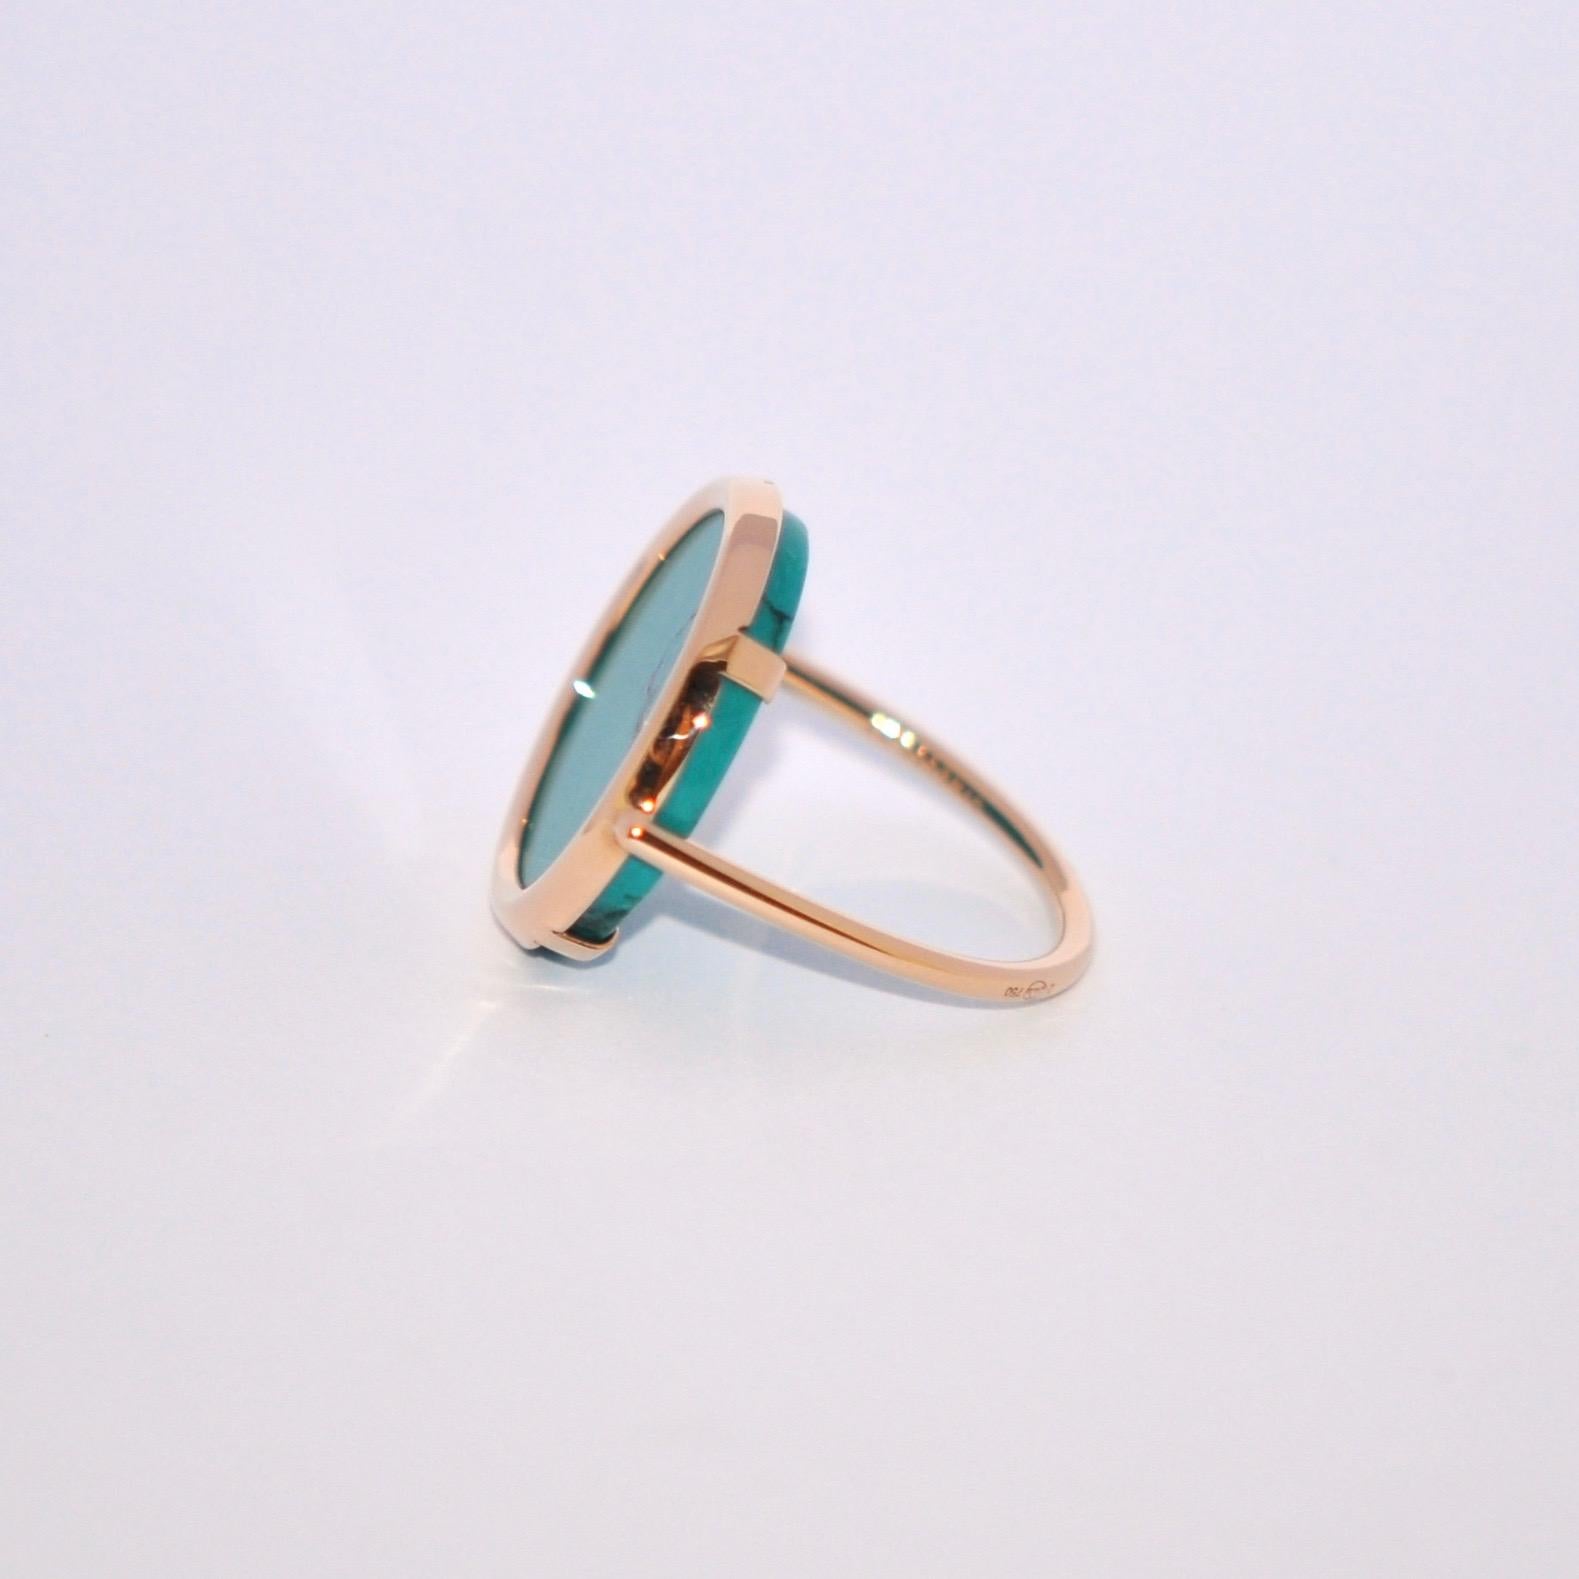 Discover this Round Turquoise and Rose Gold 18 Karat Fashion Ring by Mesure & Art du Temps.
Turquoise
Rose Gold 18 Karat
French Size 52 
US Size 6